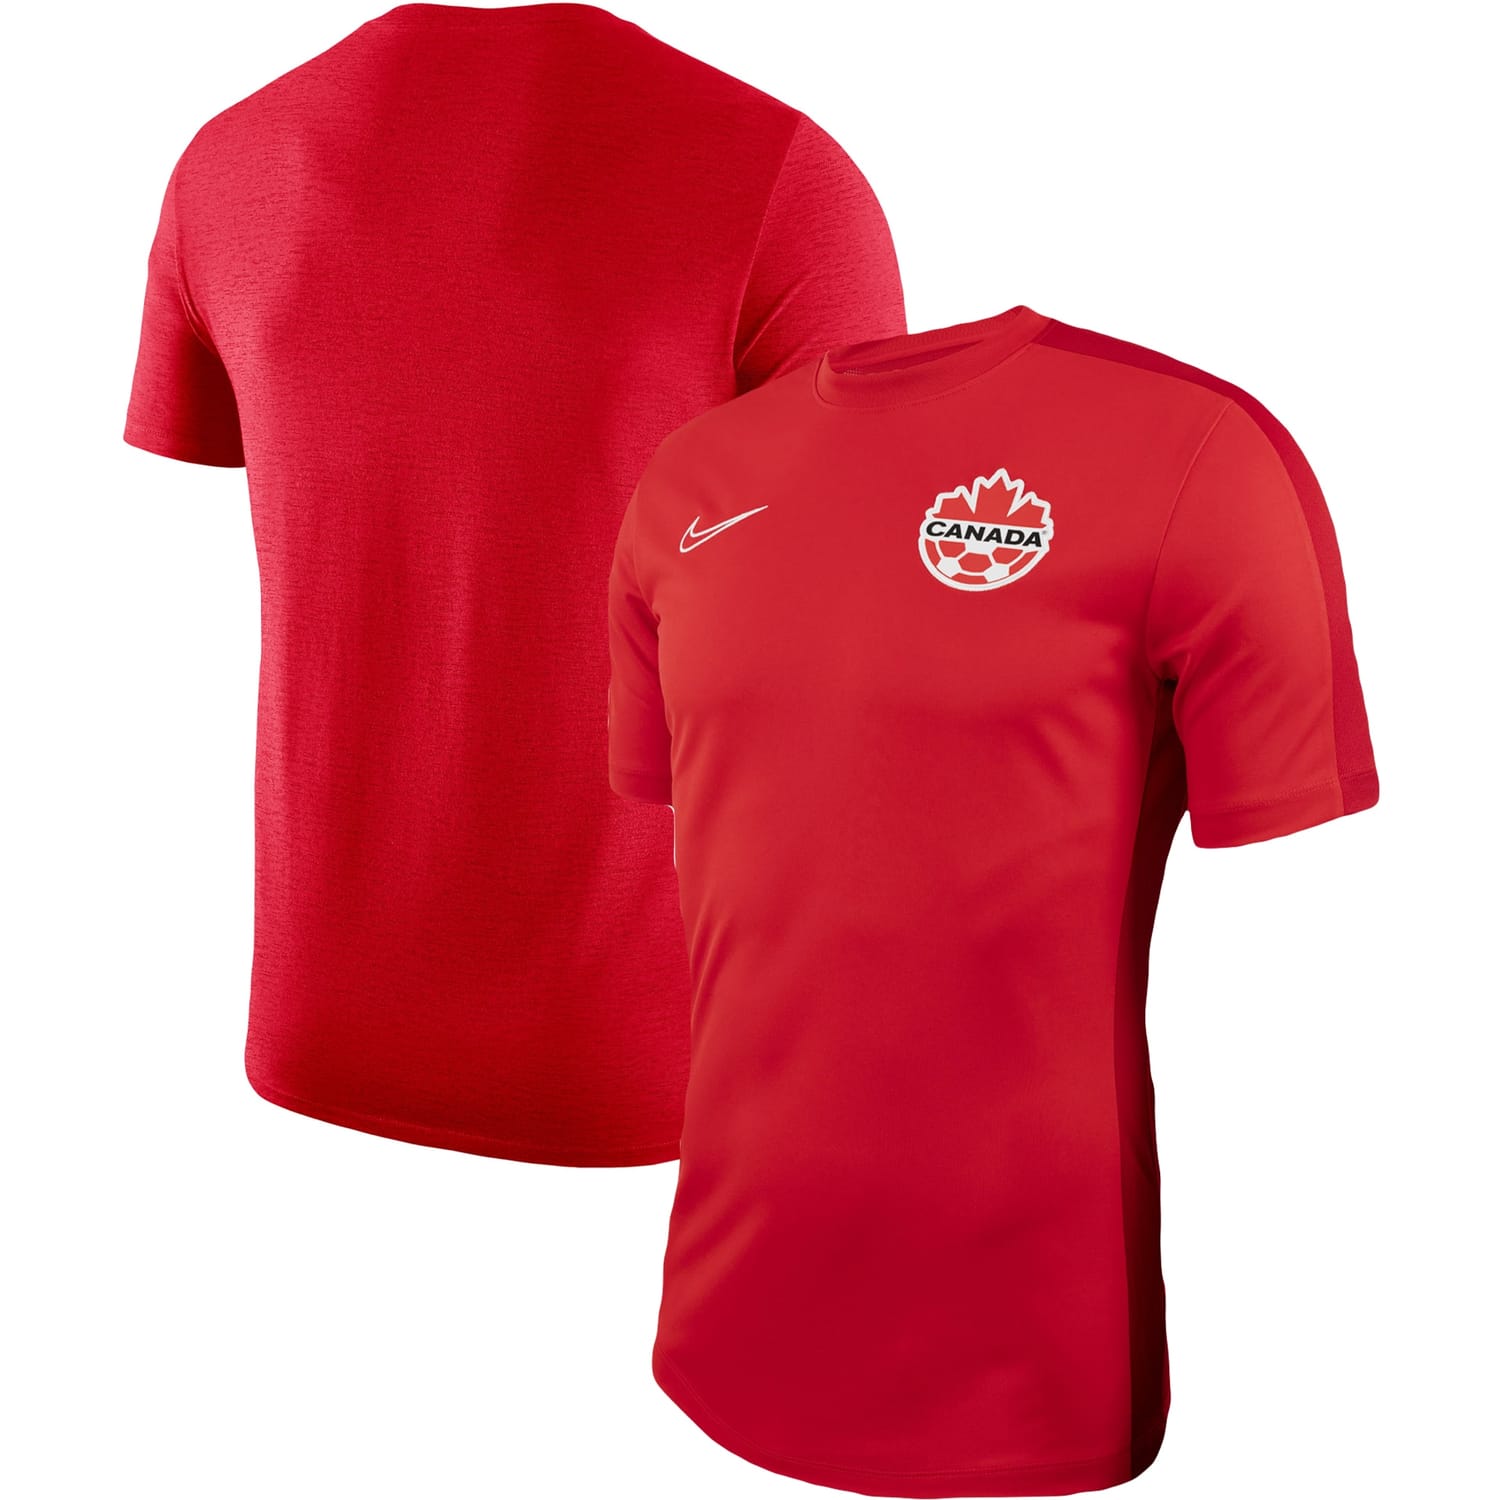 Canada Soccer Training Jersey Shirt Red for Men